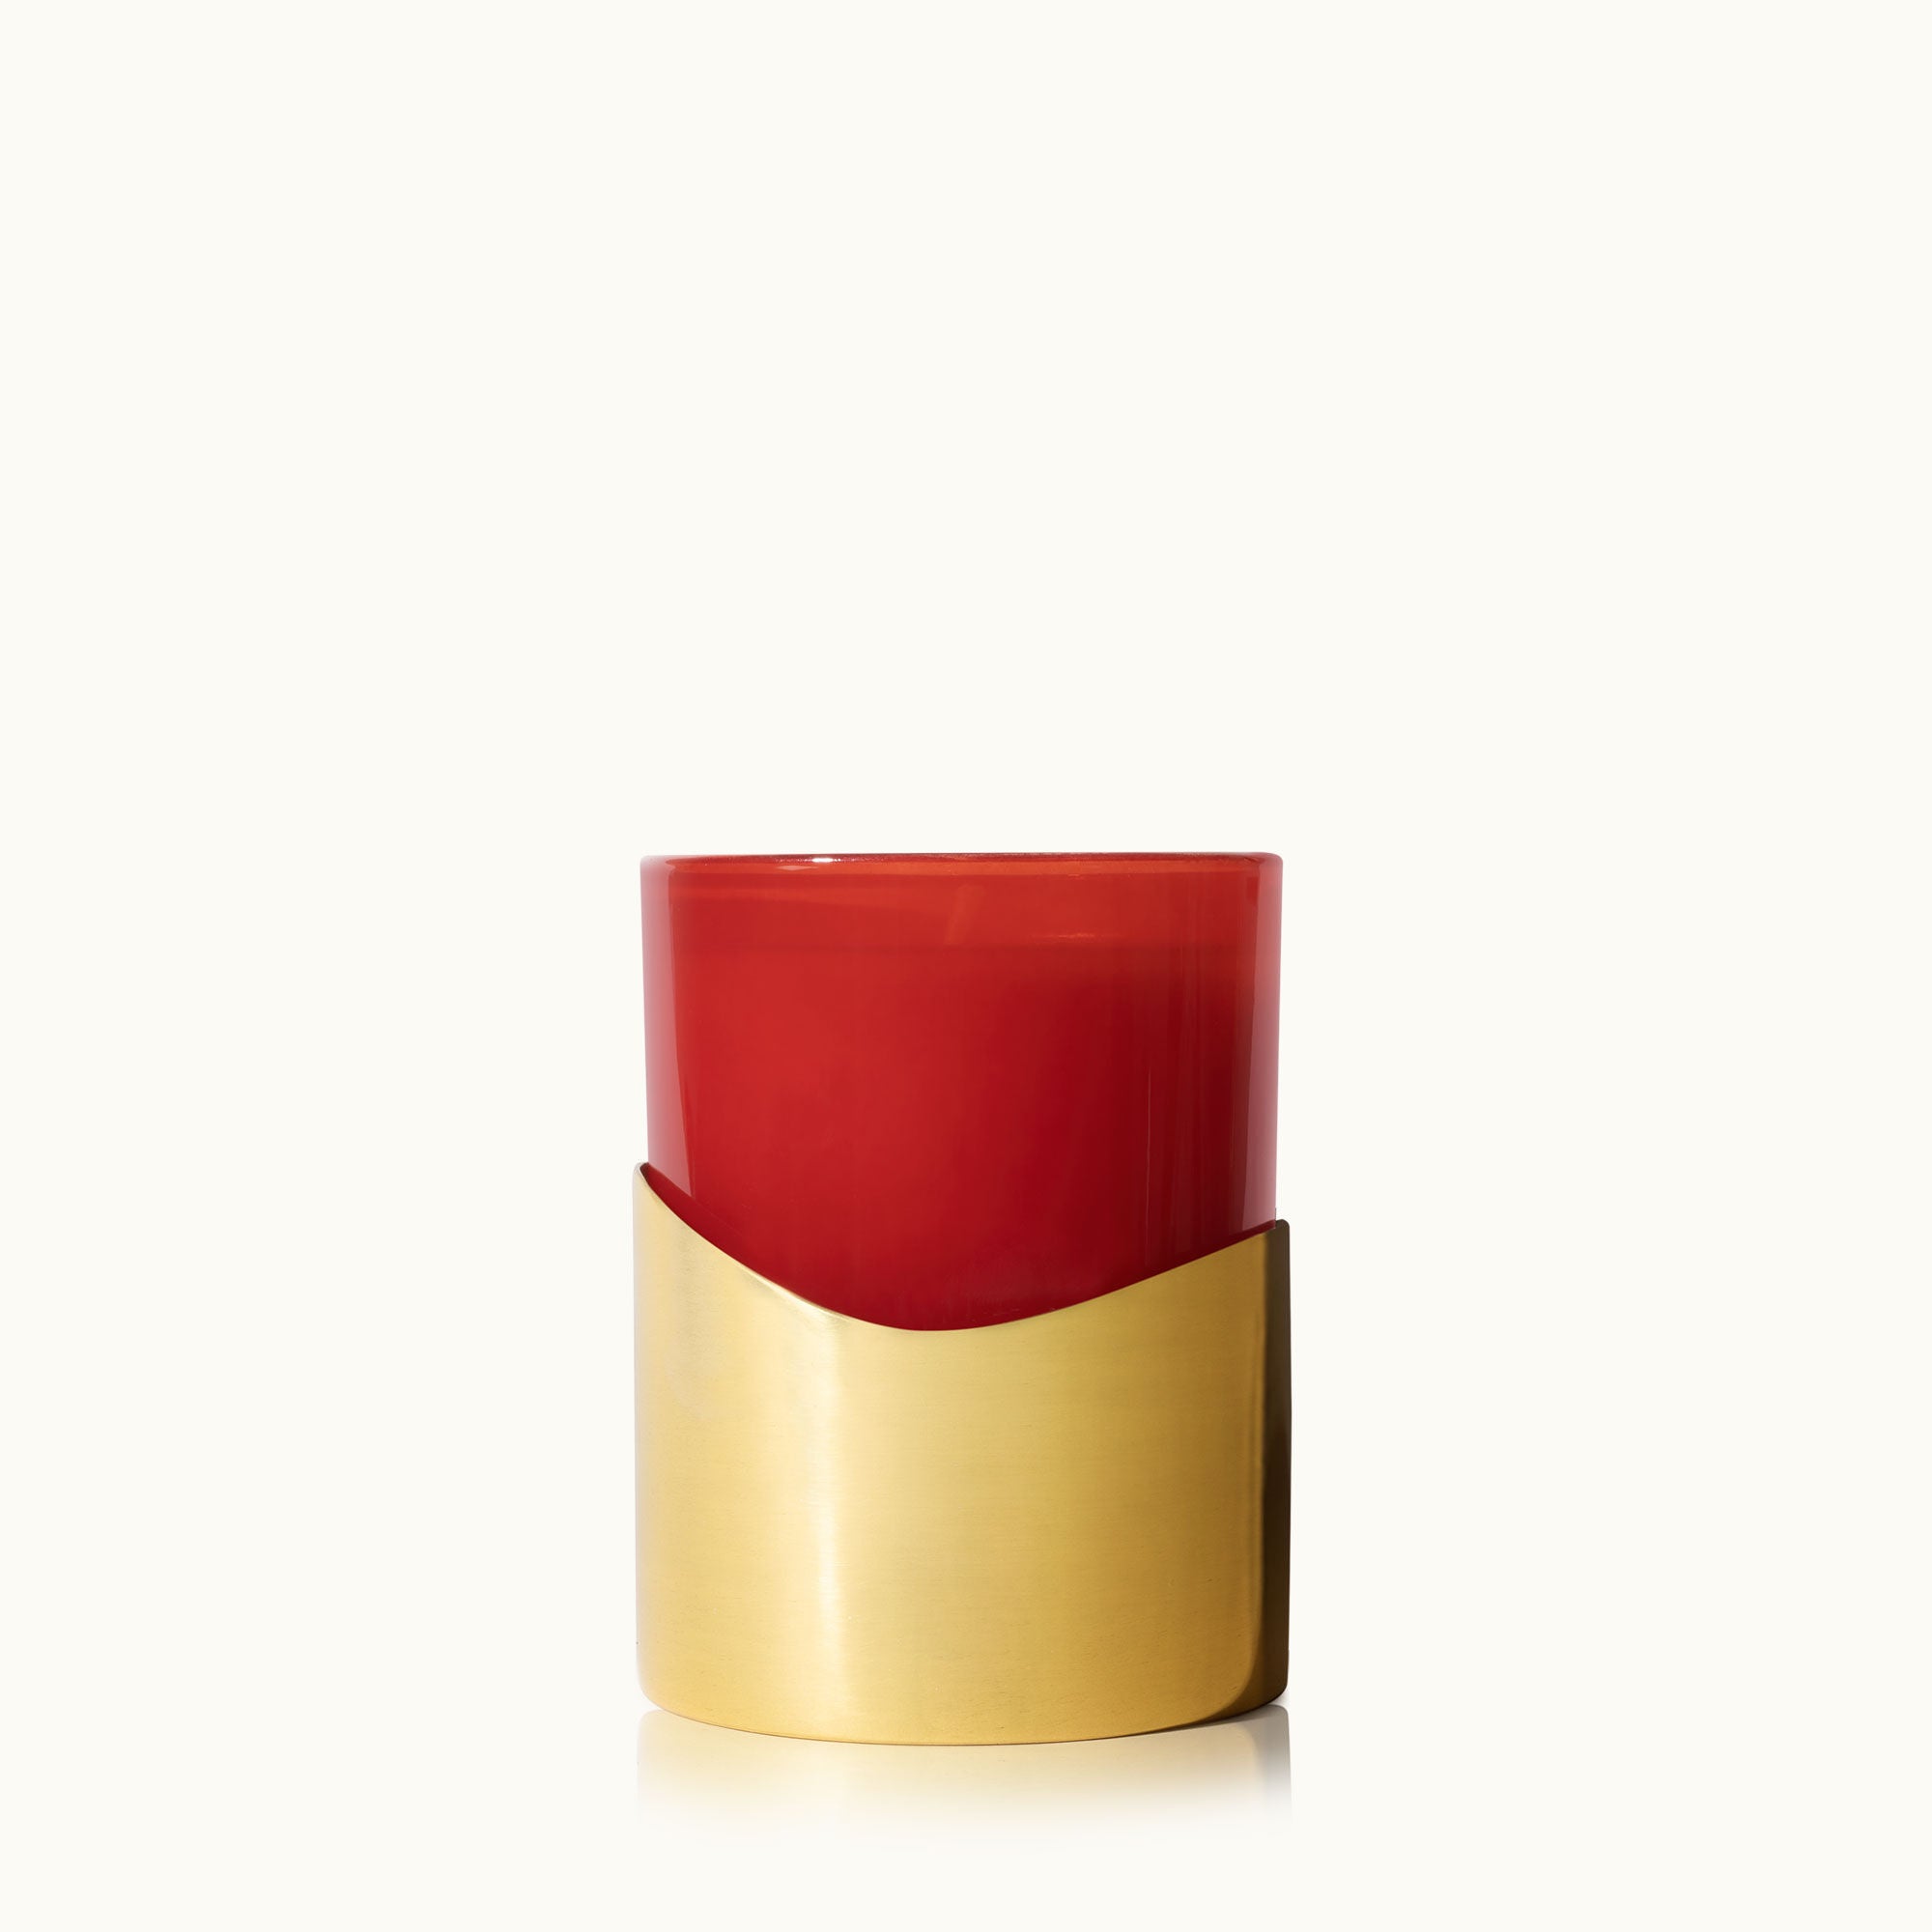 Simmered Cider Harvest Red Poured Candle with Gold Sleeve